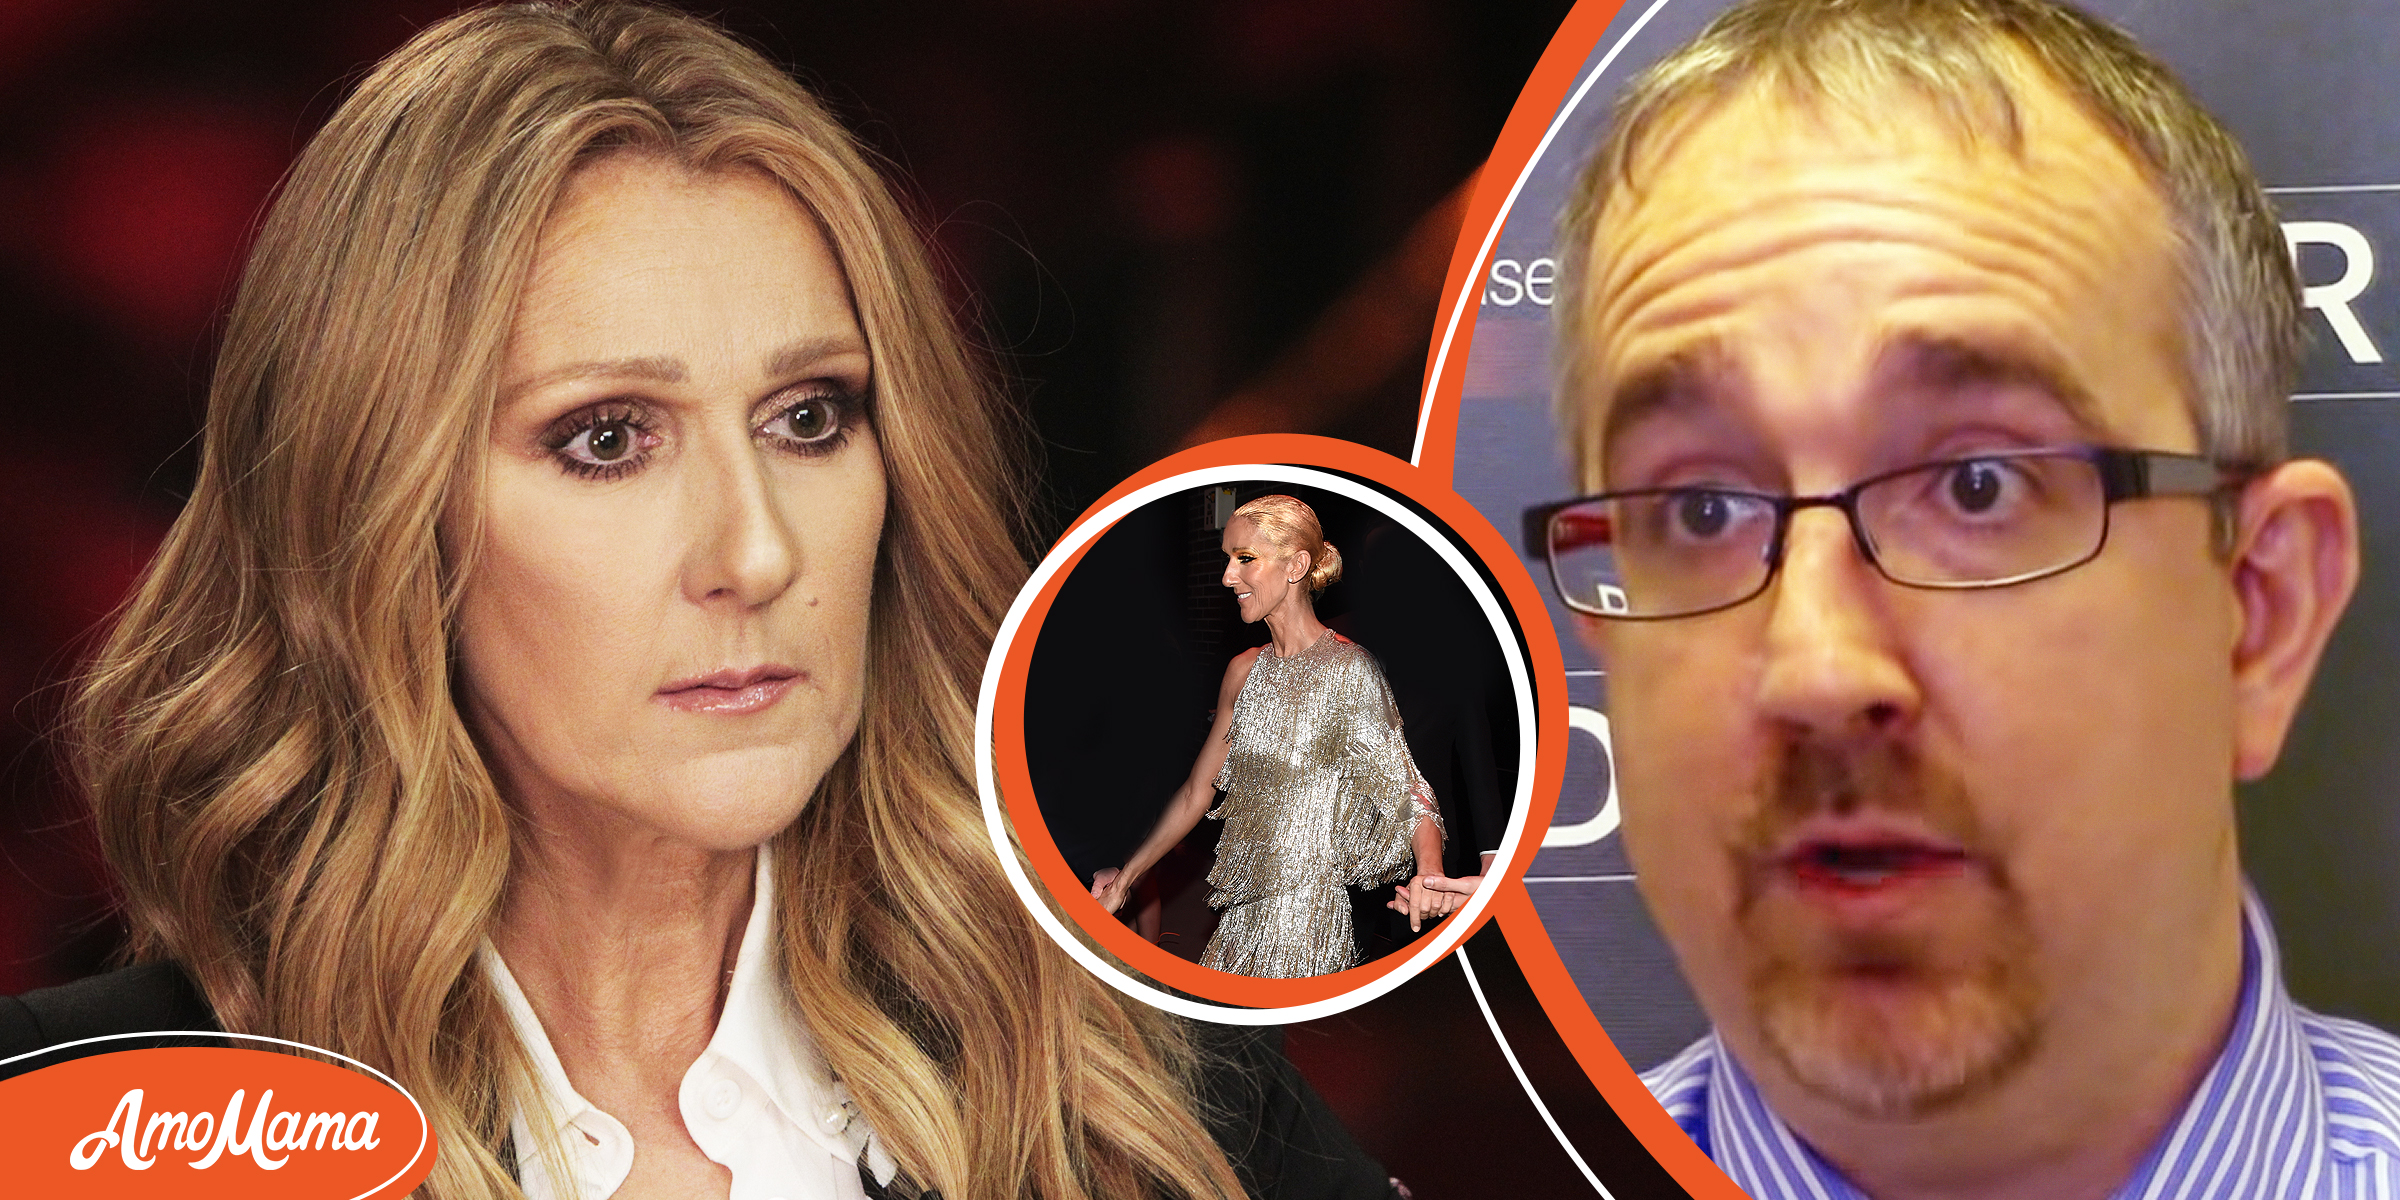 Celine Dion Cancels Entire Tour as She Suffers SPS Which Turns People into 'Statues' — Doctor Explains Rare Condition